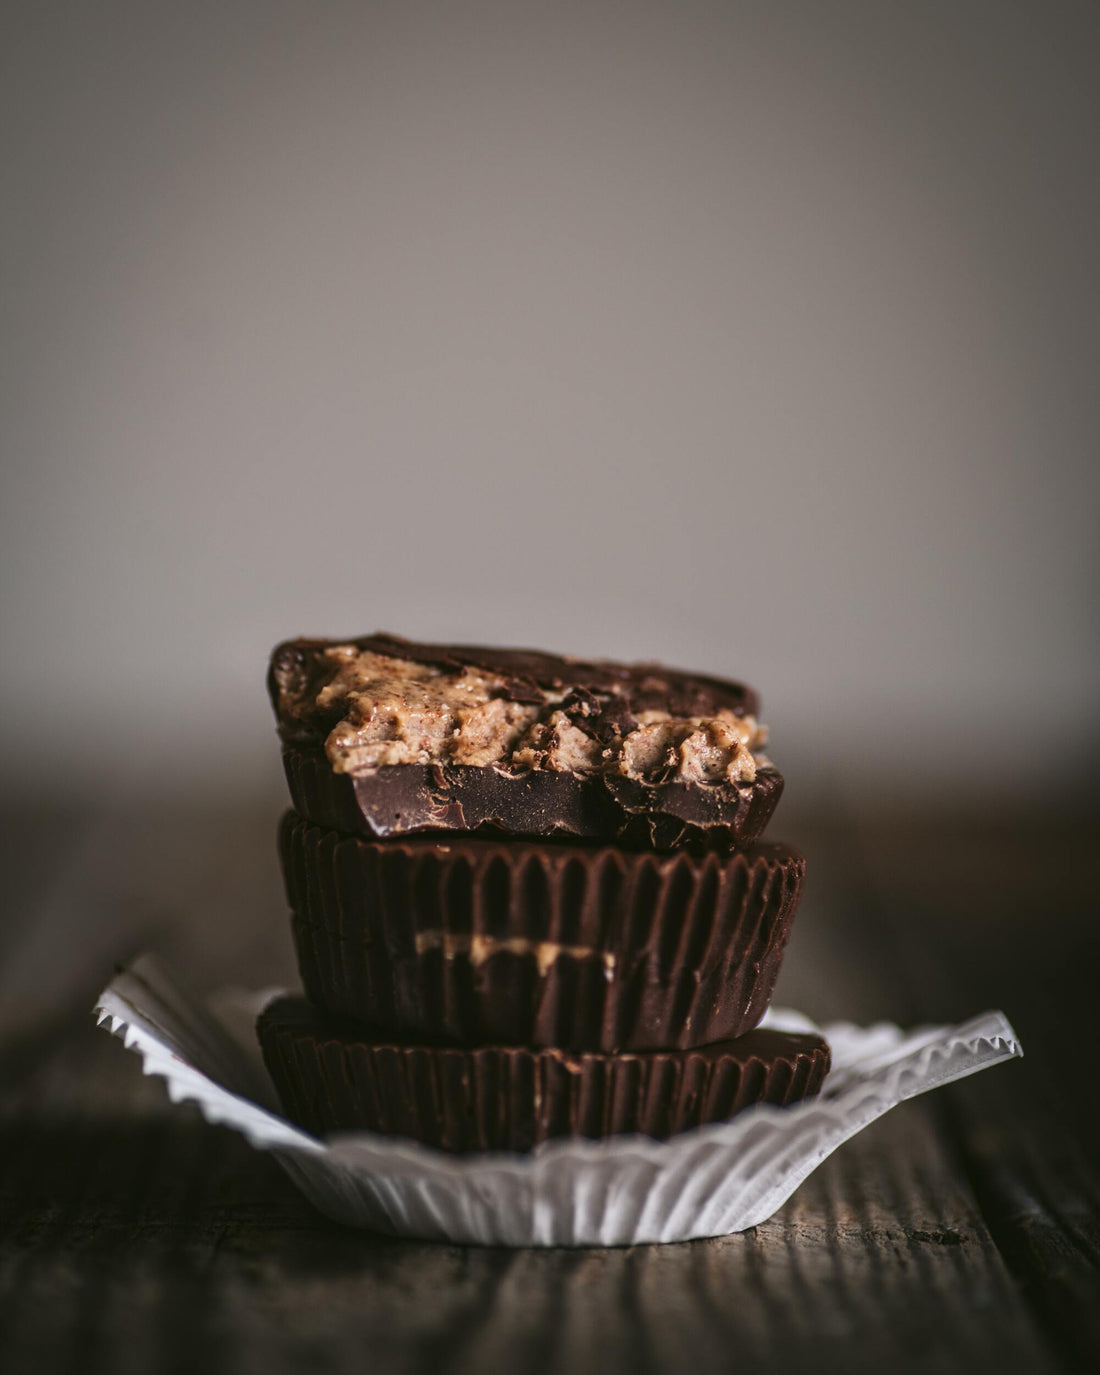 Get Your Peanut Butter Fix with Keto-Friendly Fat Bombs Treats!